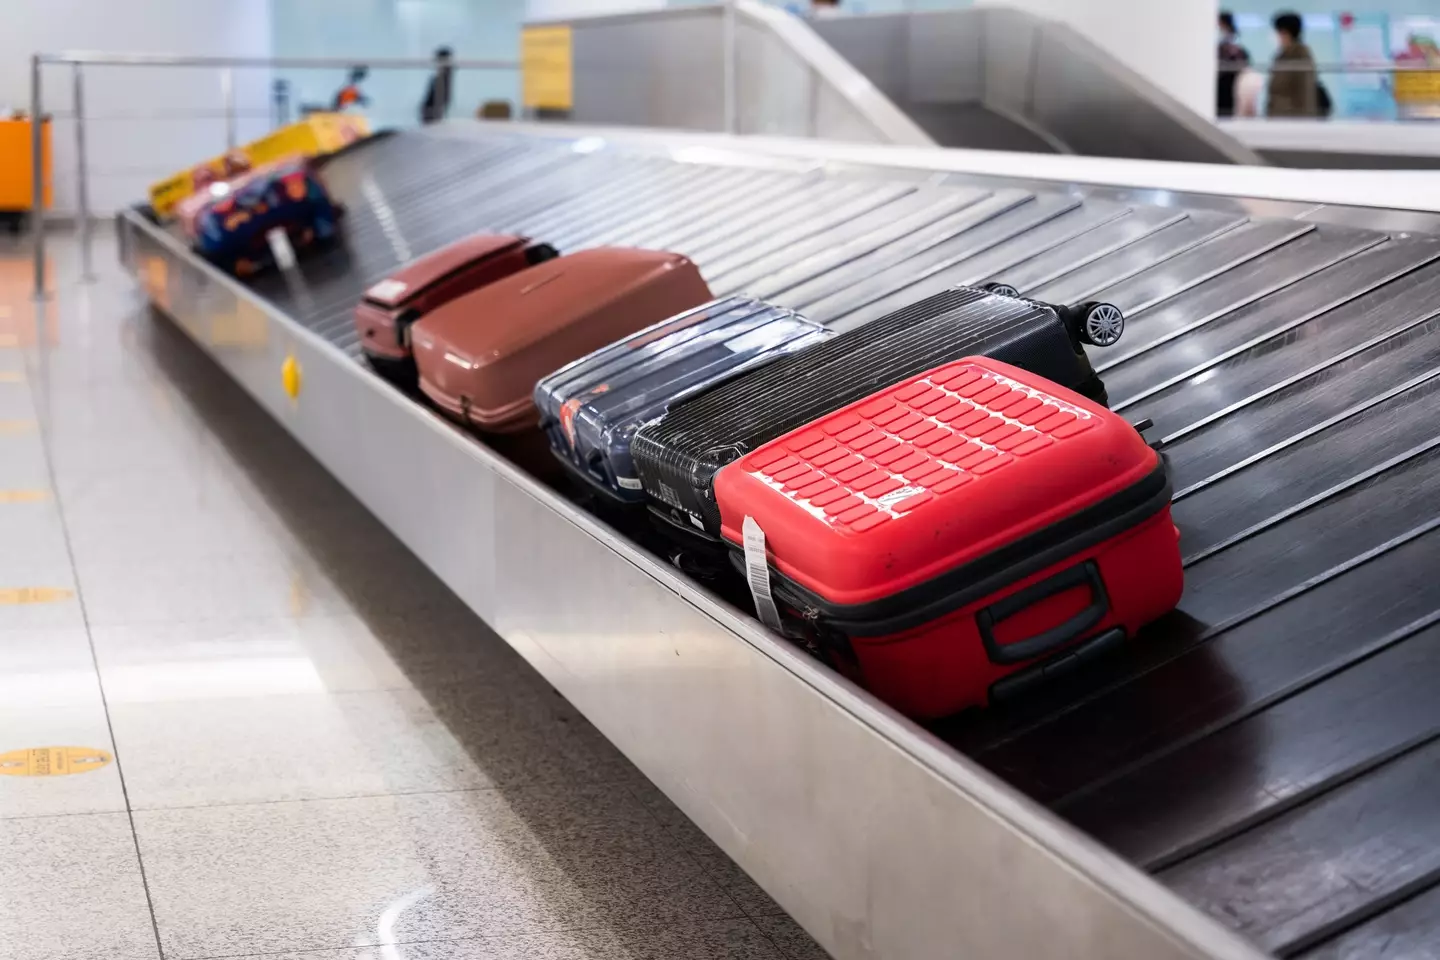 Many of us think that checking our bags in early guarantees early retrieval. (Getty Stock Image)